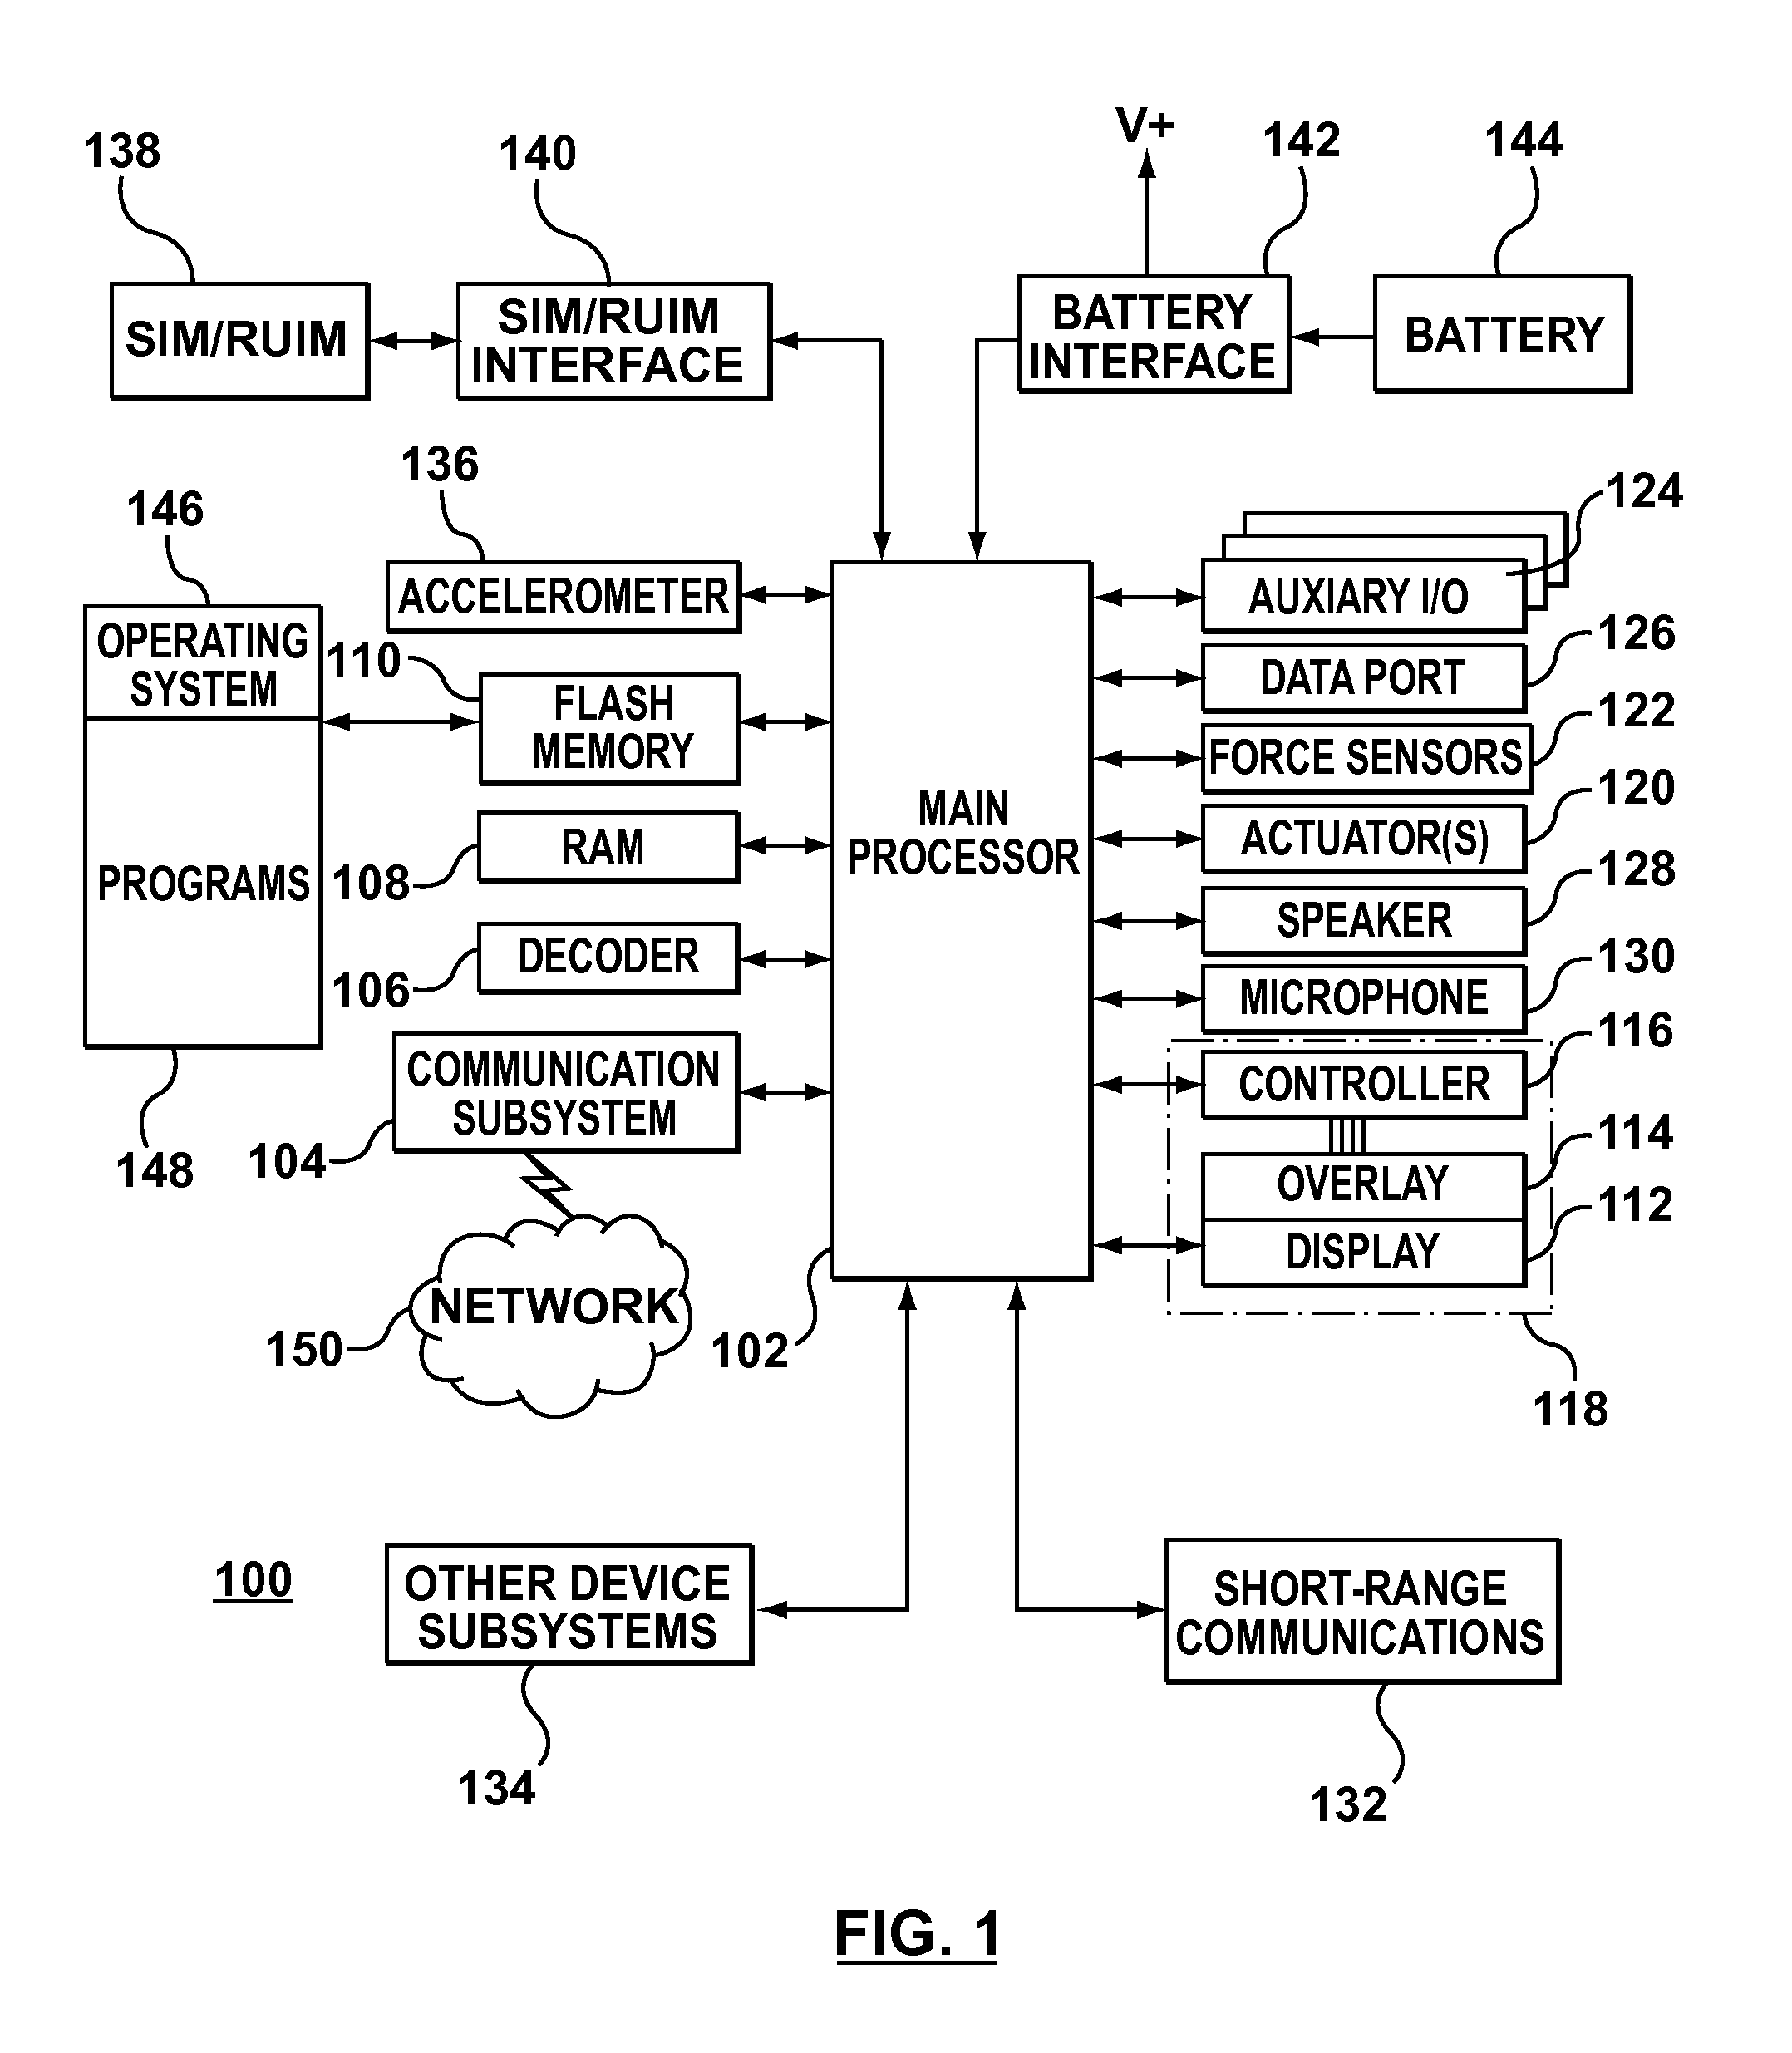 Methods and apparatus for detecting unauthorized batteries or tampering by monitoring a thermal profile